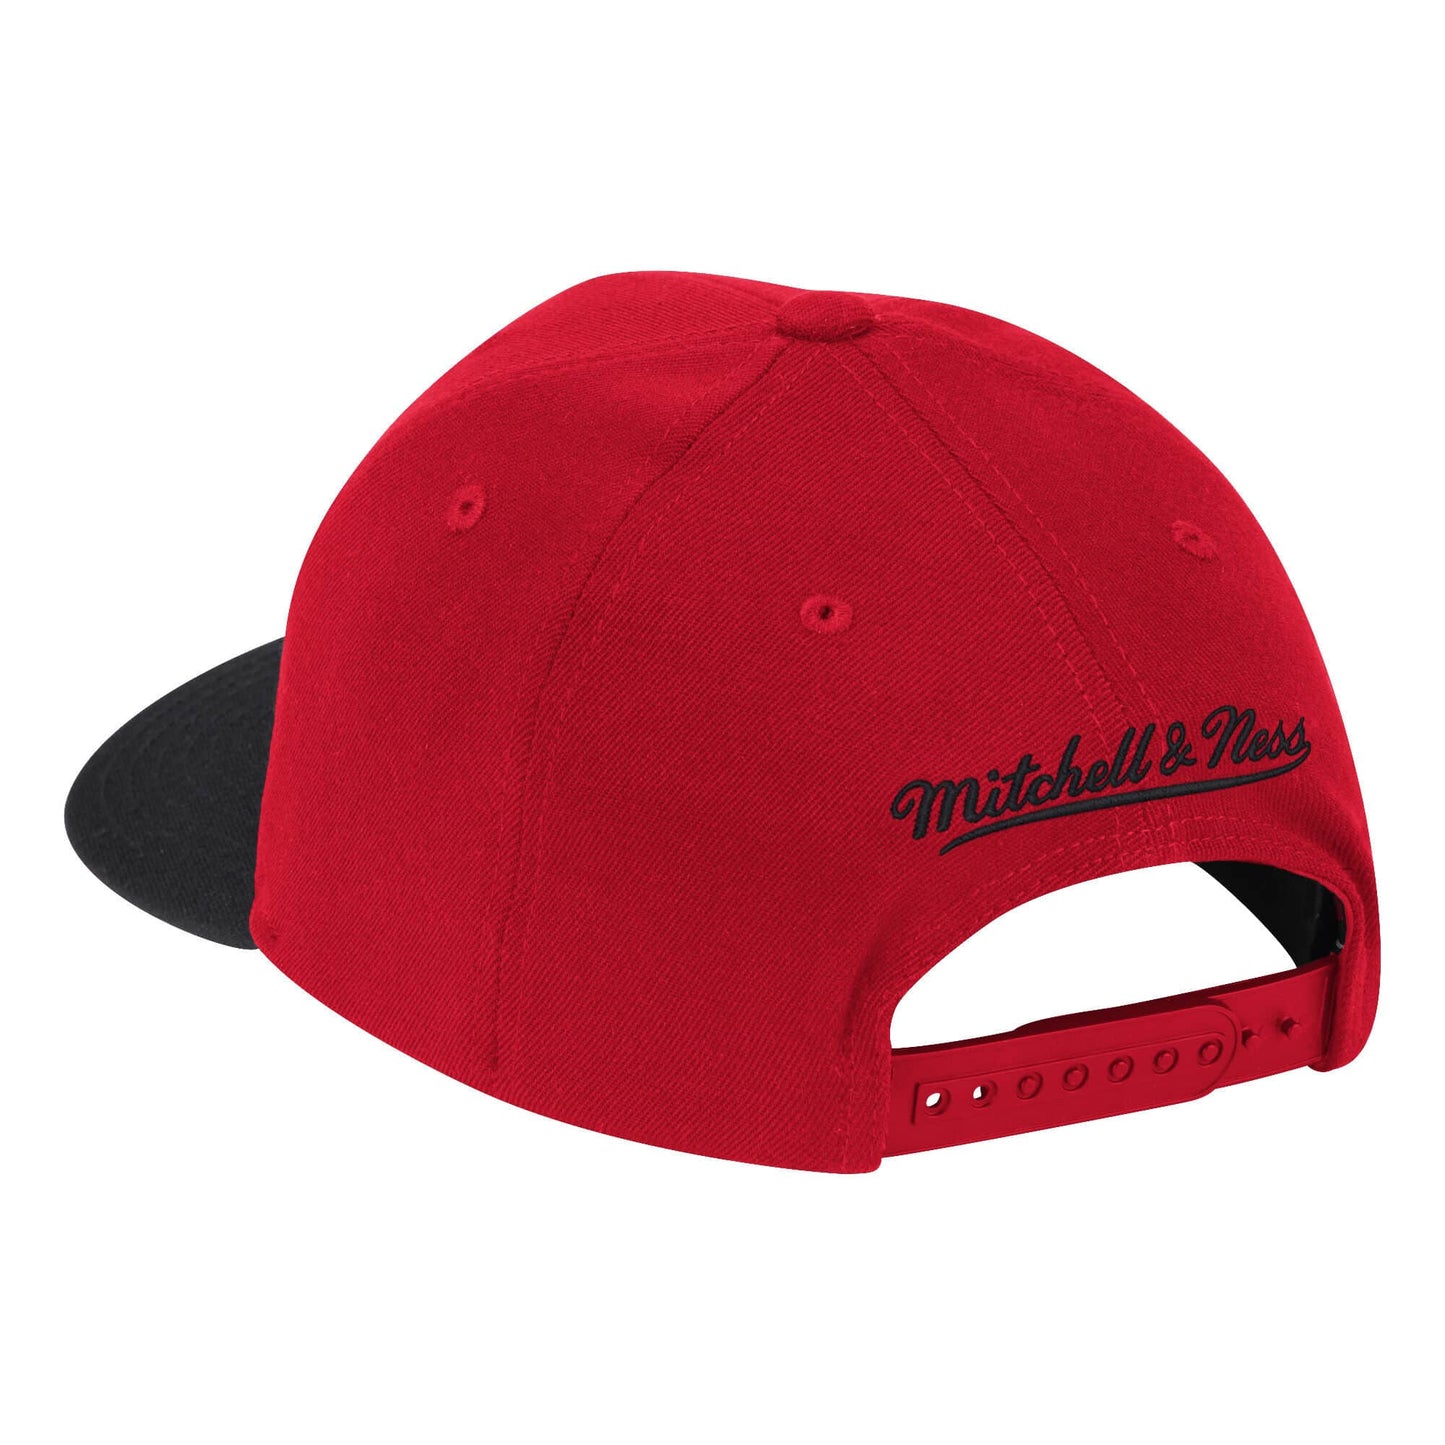 Mens NBA Houston Rockets Red/Black Wool 2 Tone Snapback Hat By Mitchell And Ness